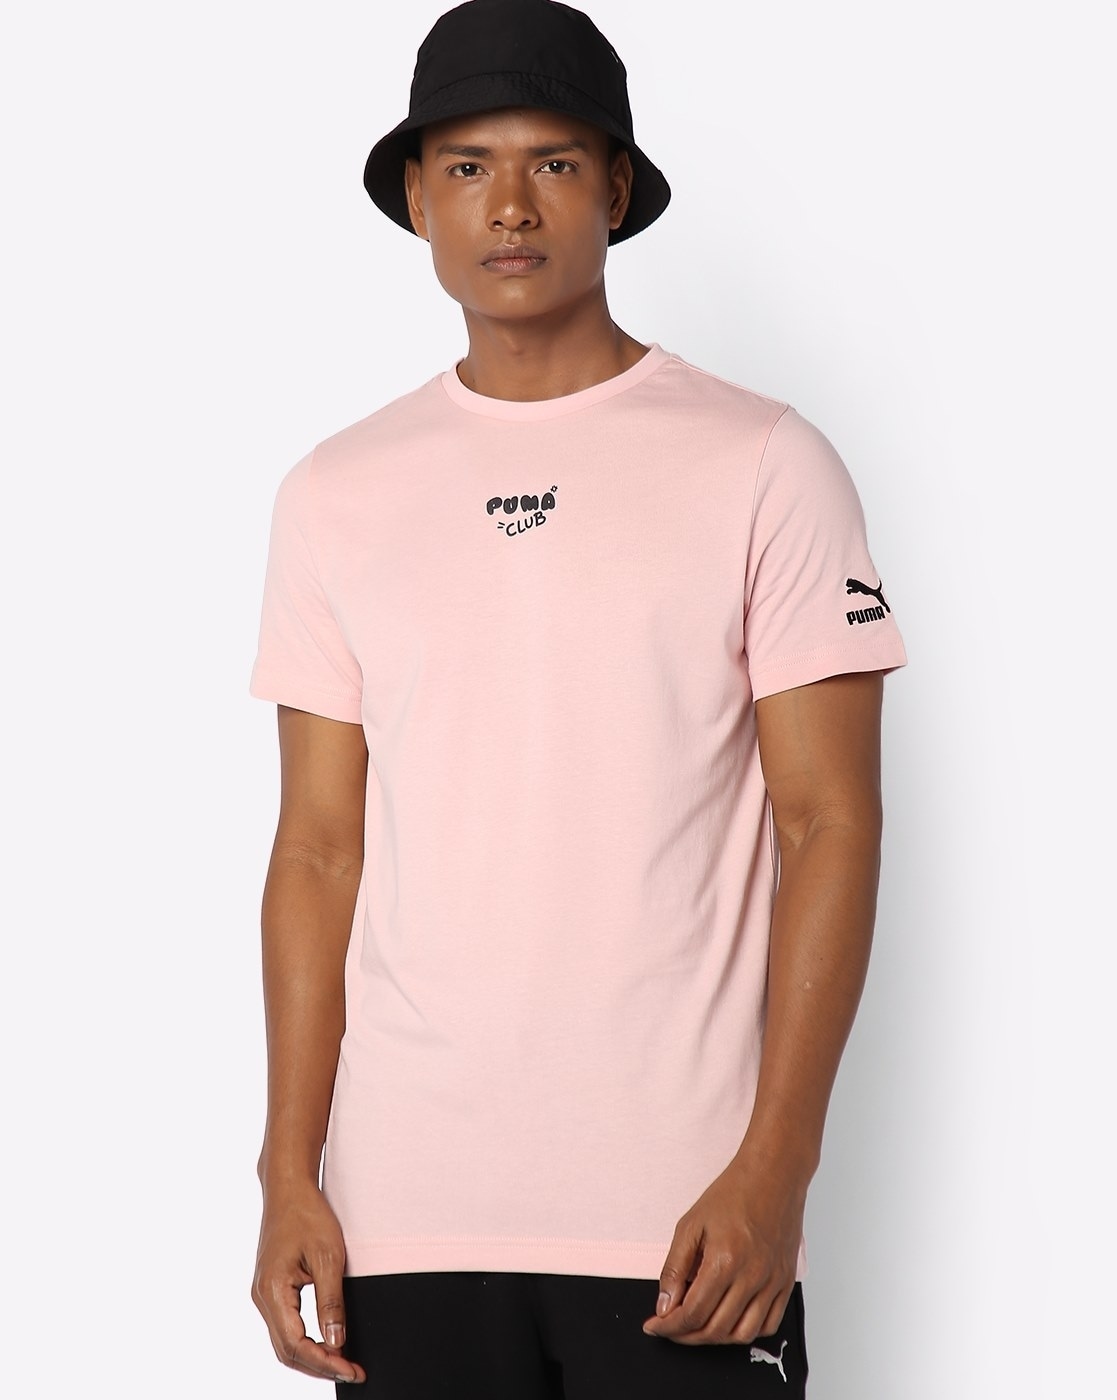 Buy Pink Tshirts for Men Online by Puma